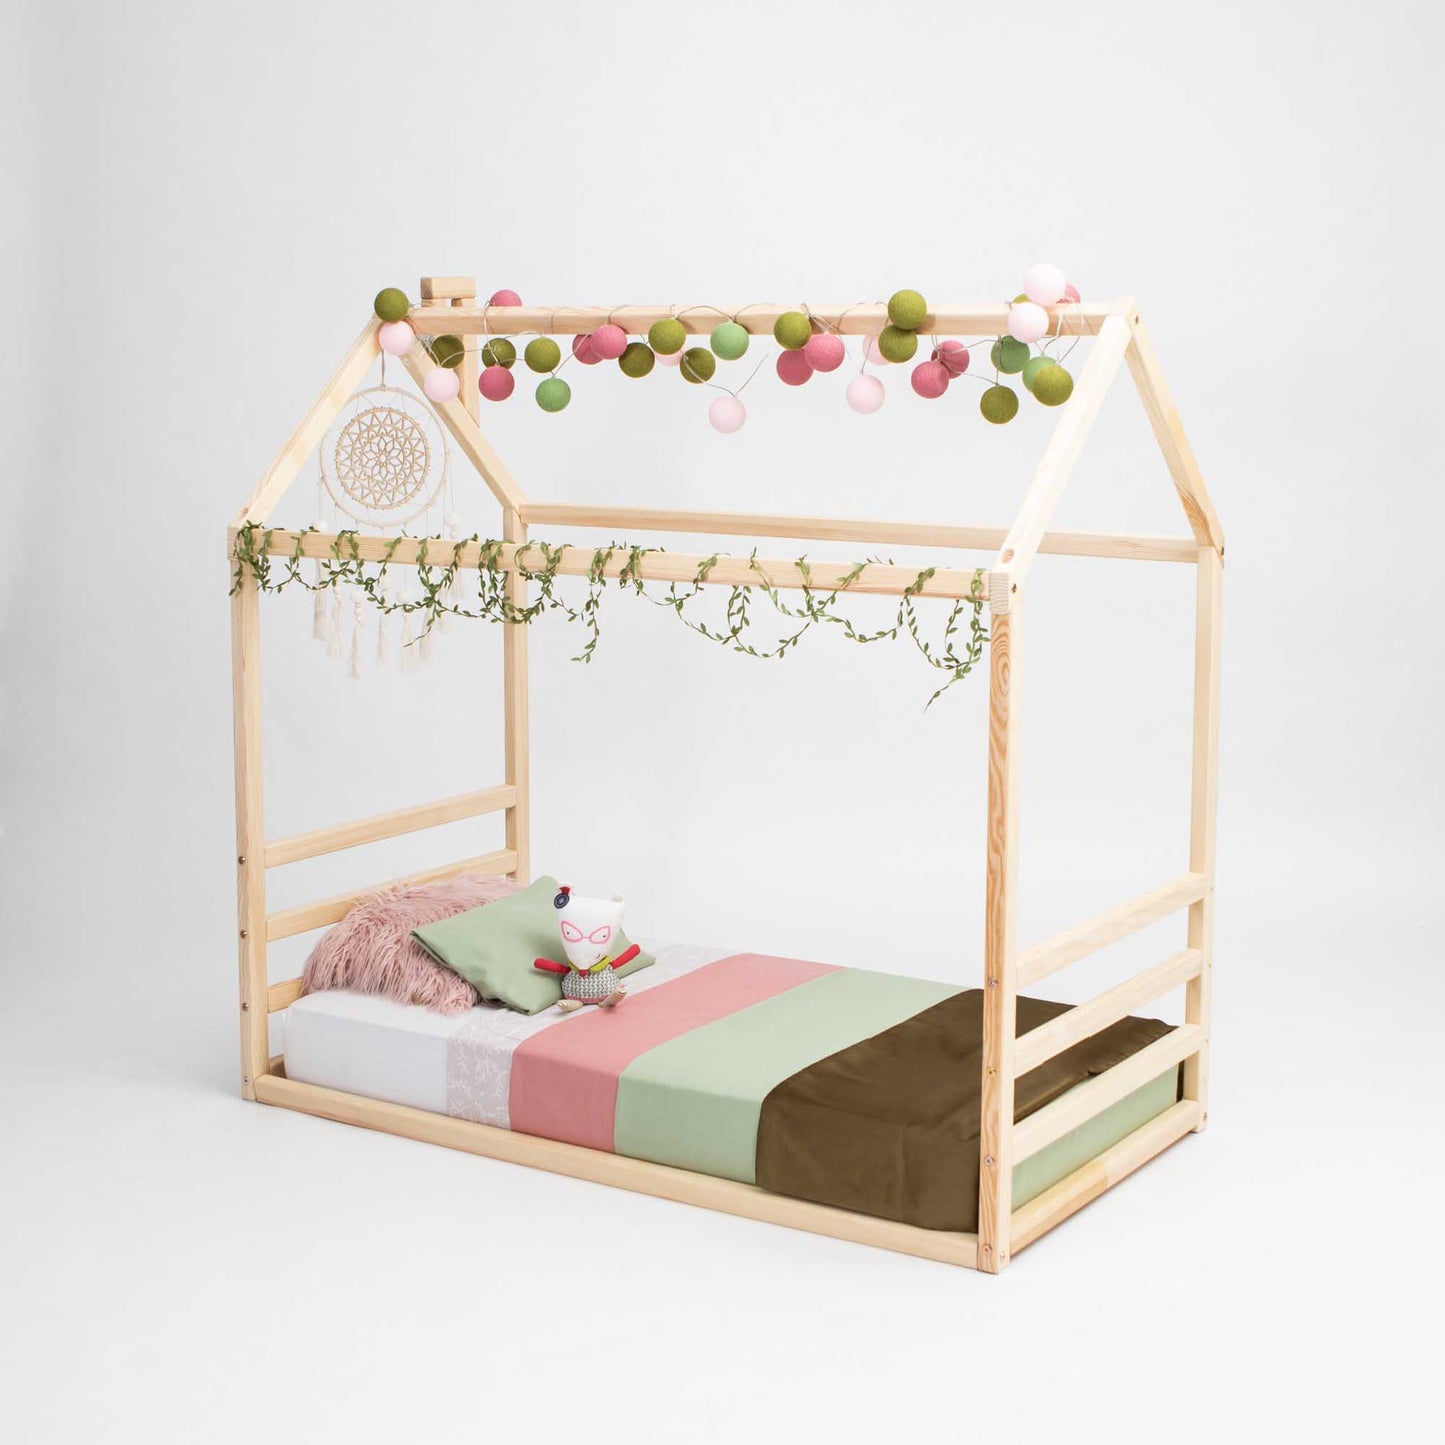 A Sweet Home From Wood floor house-frame bed with a horizontal headboard and footboard, featuring pom poms, creating a cozy sleep haven for little ones.